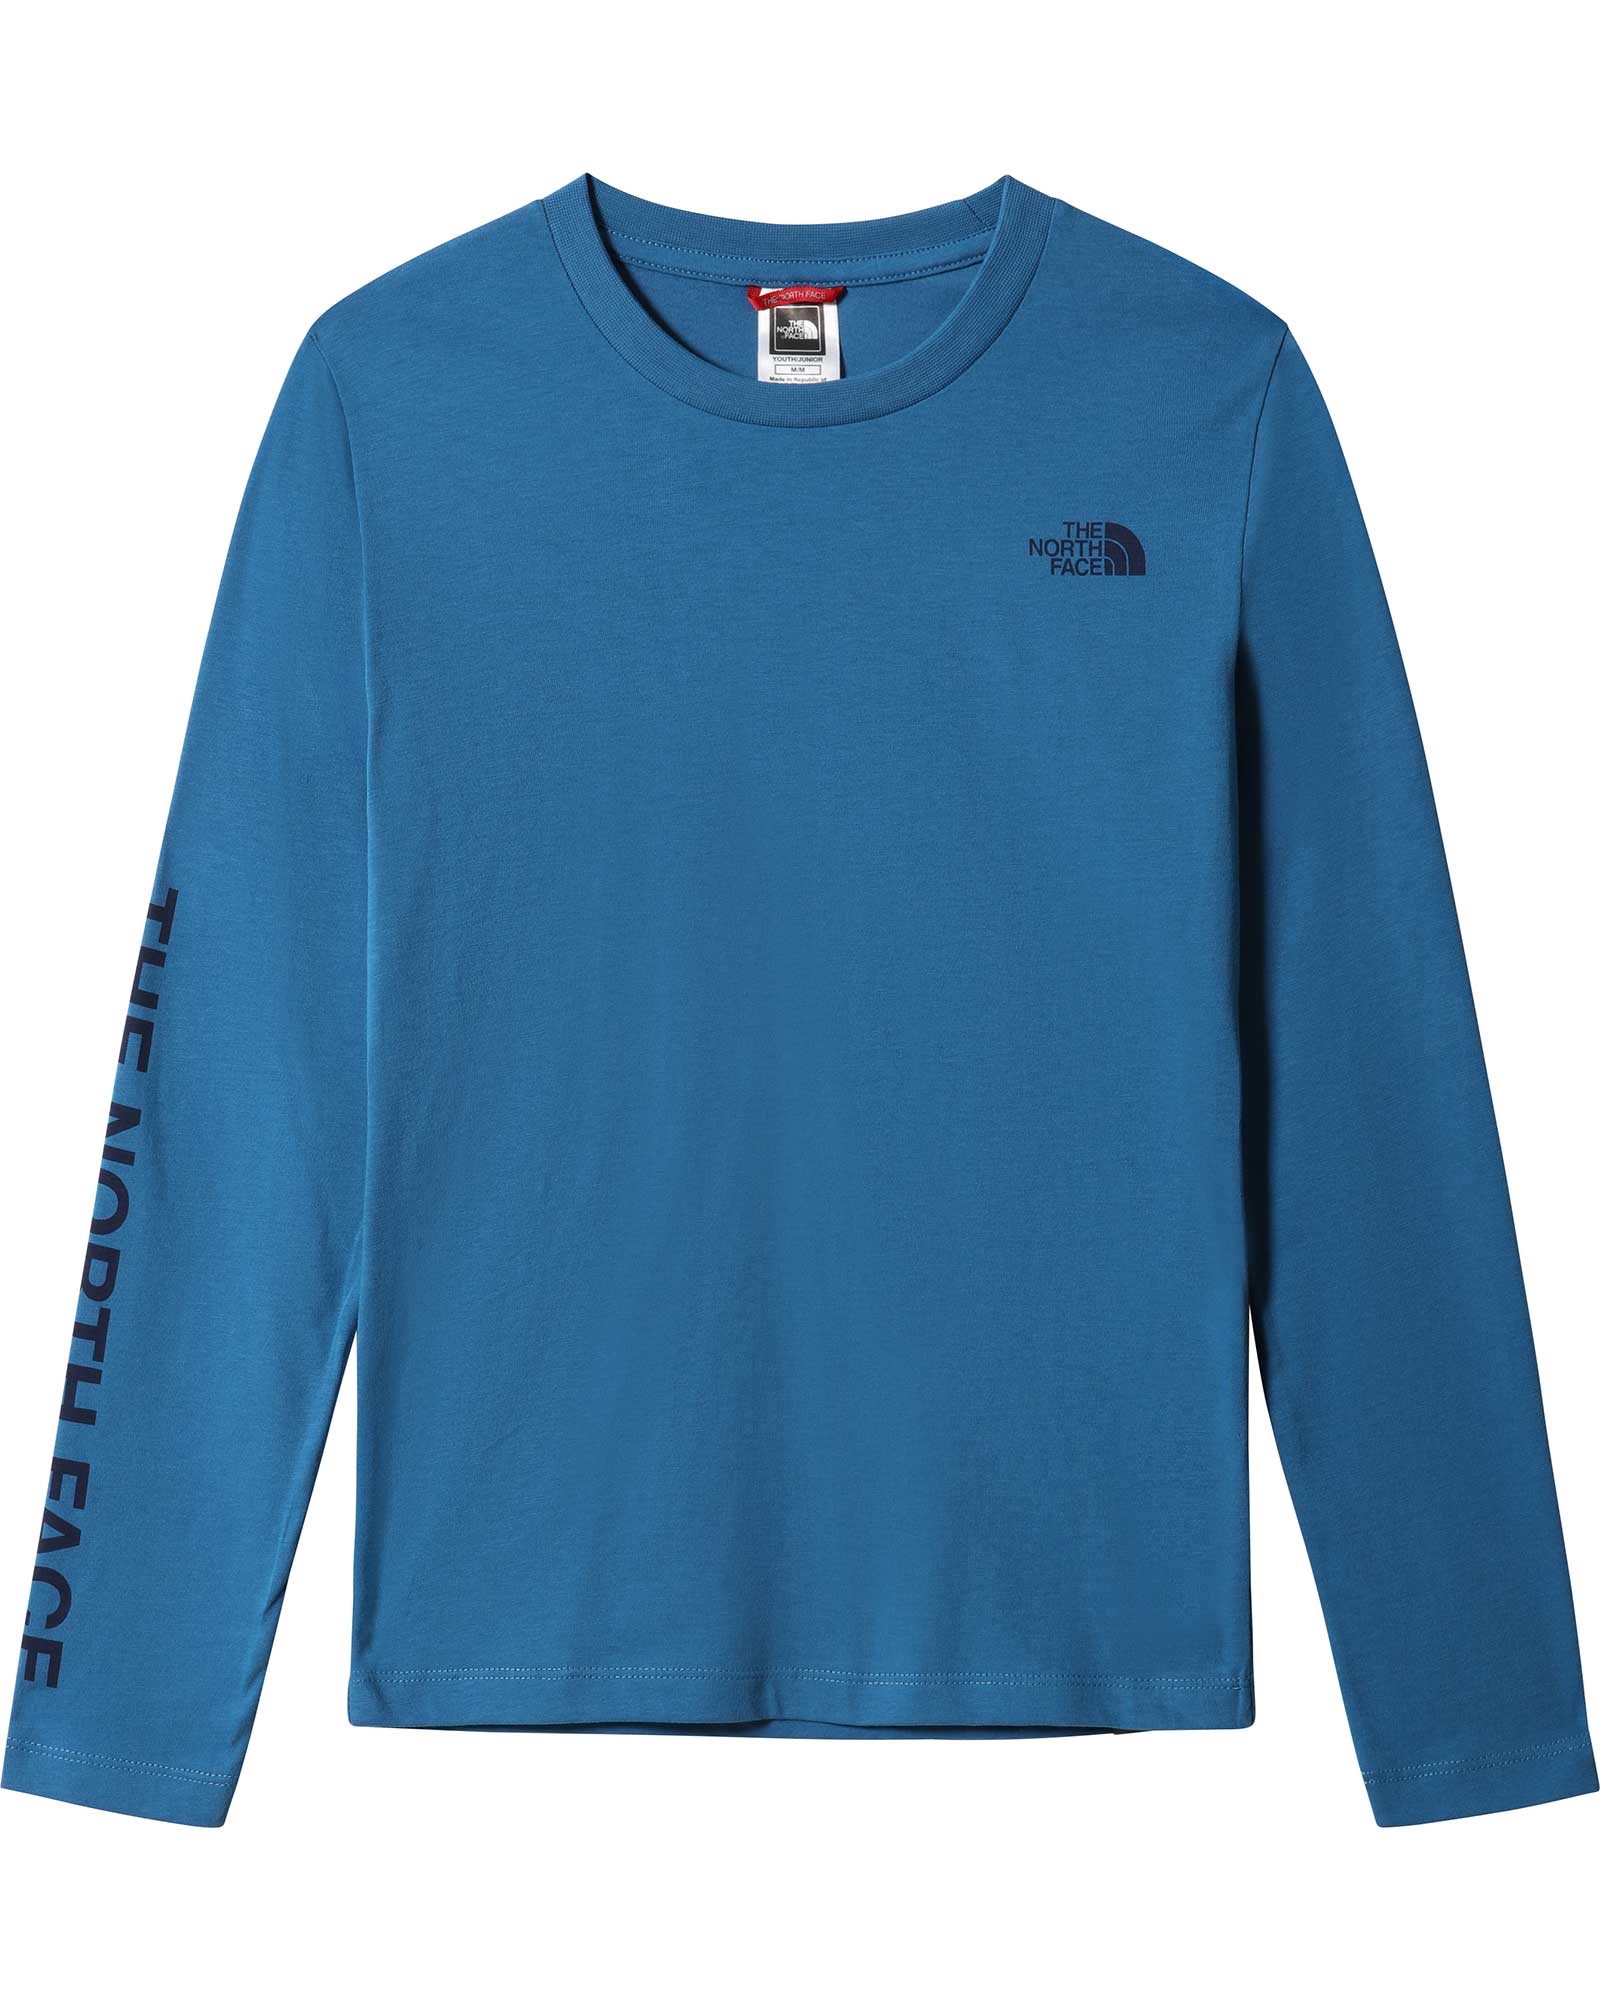 The North Face Youth Youth Long Sleeve Simple Dome Kids’ T Shirt - Banff Blue L